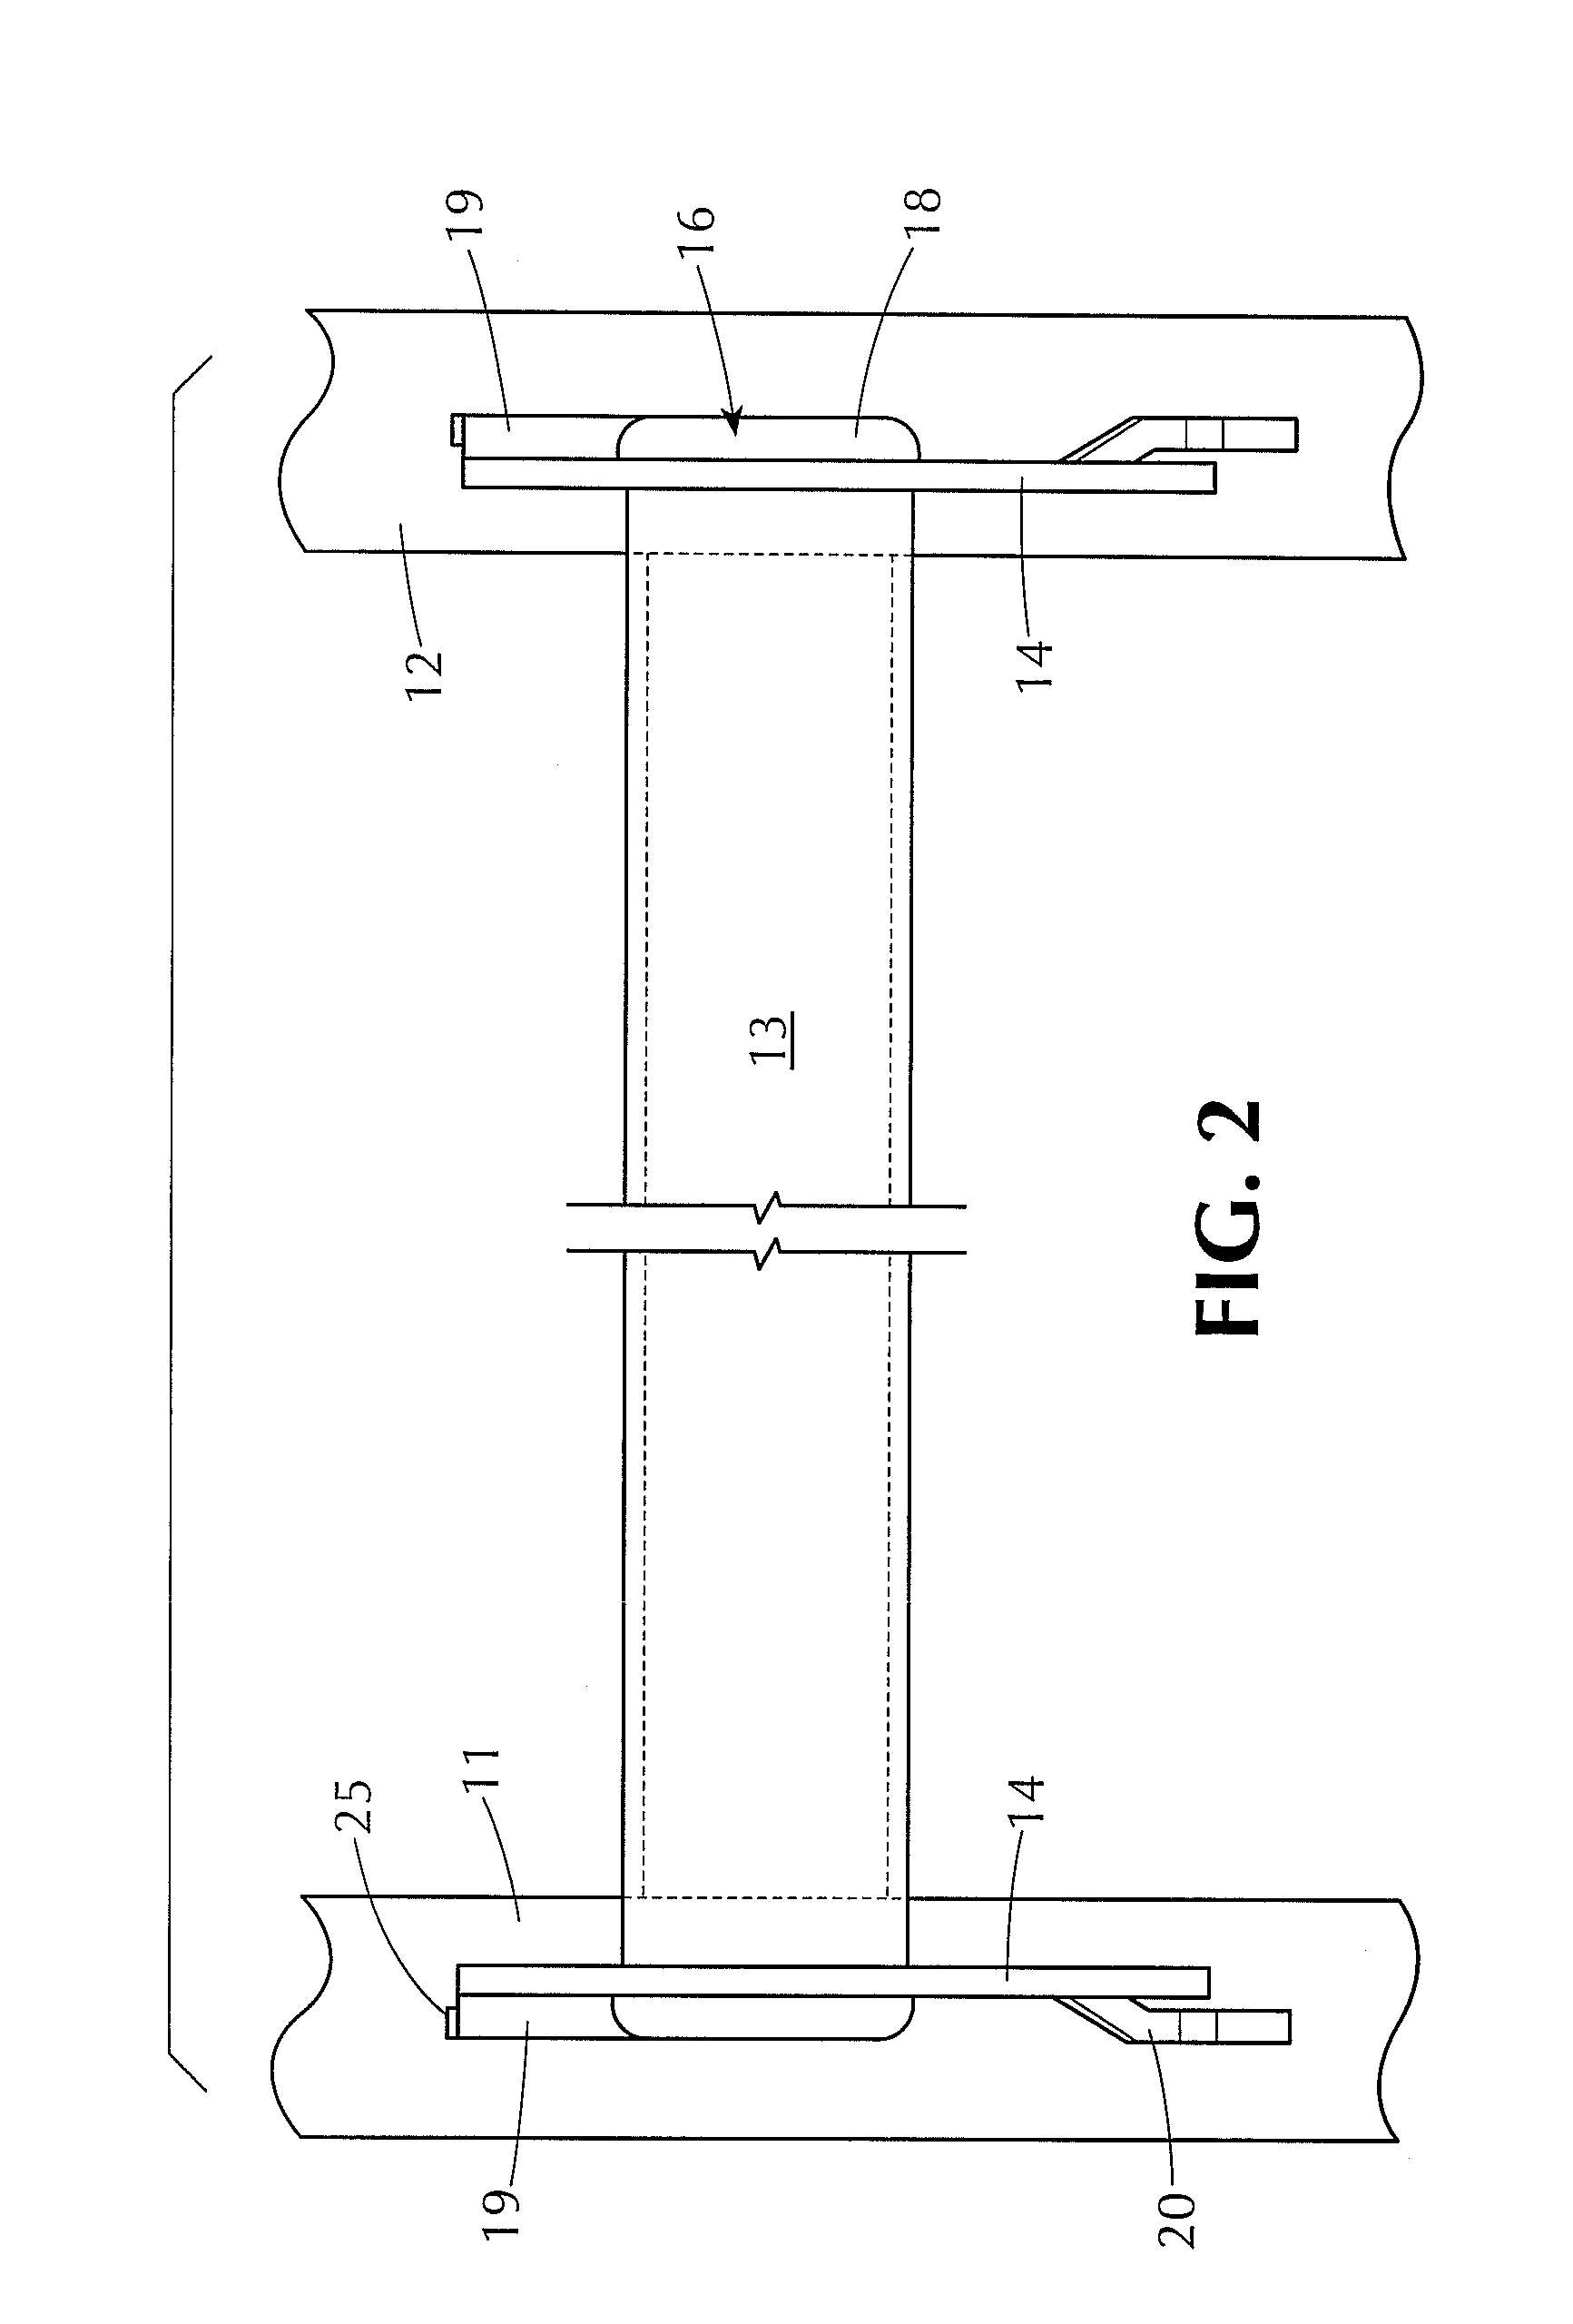 Display bar assembly for merchandising displays